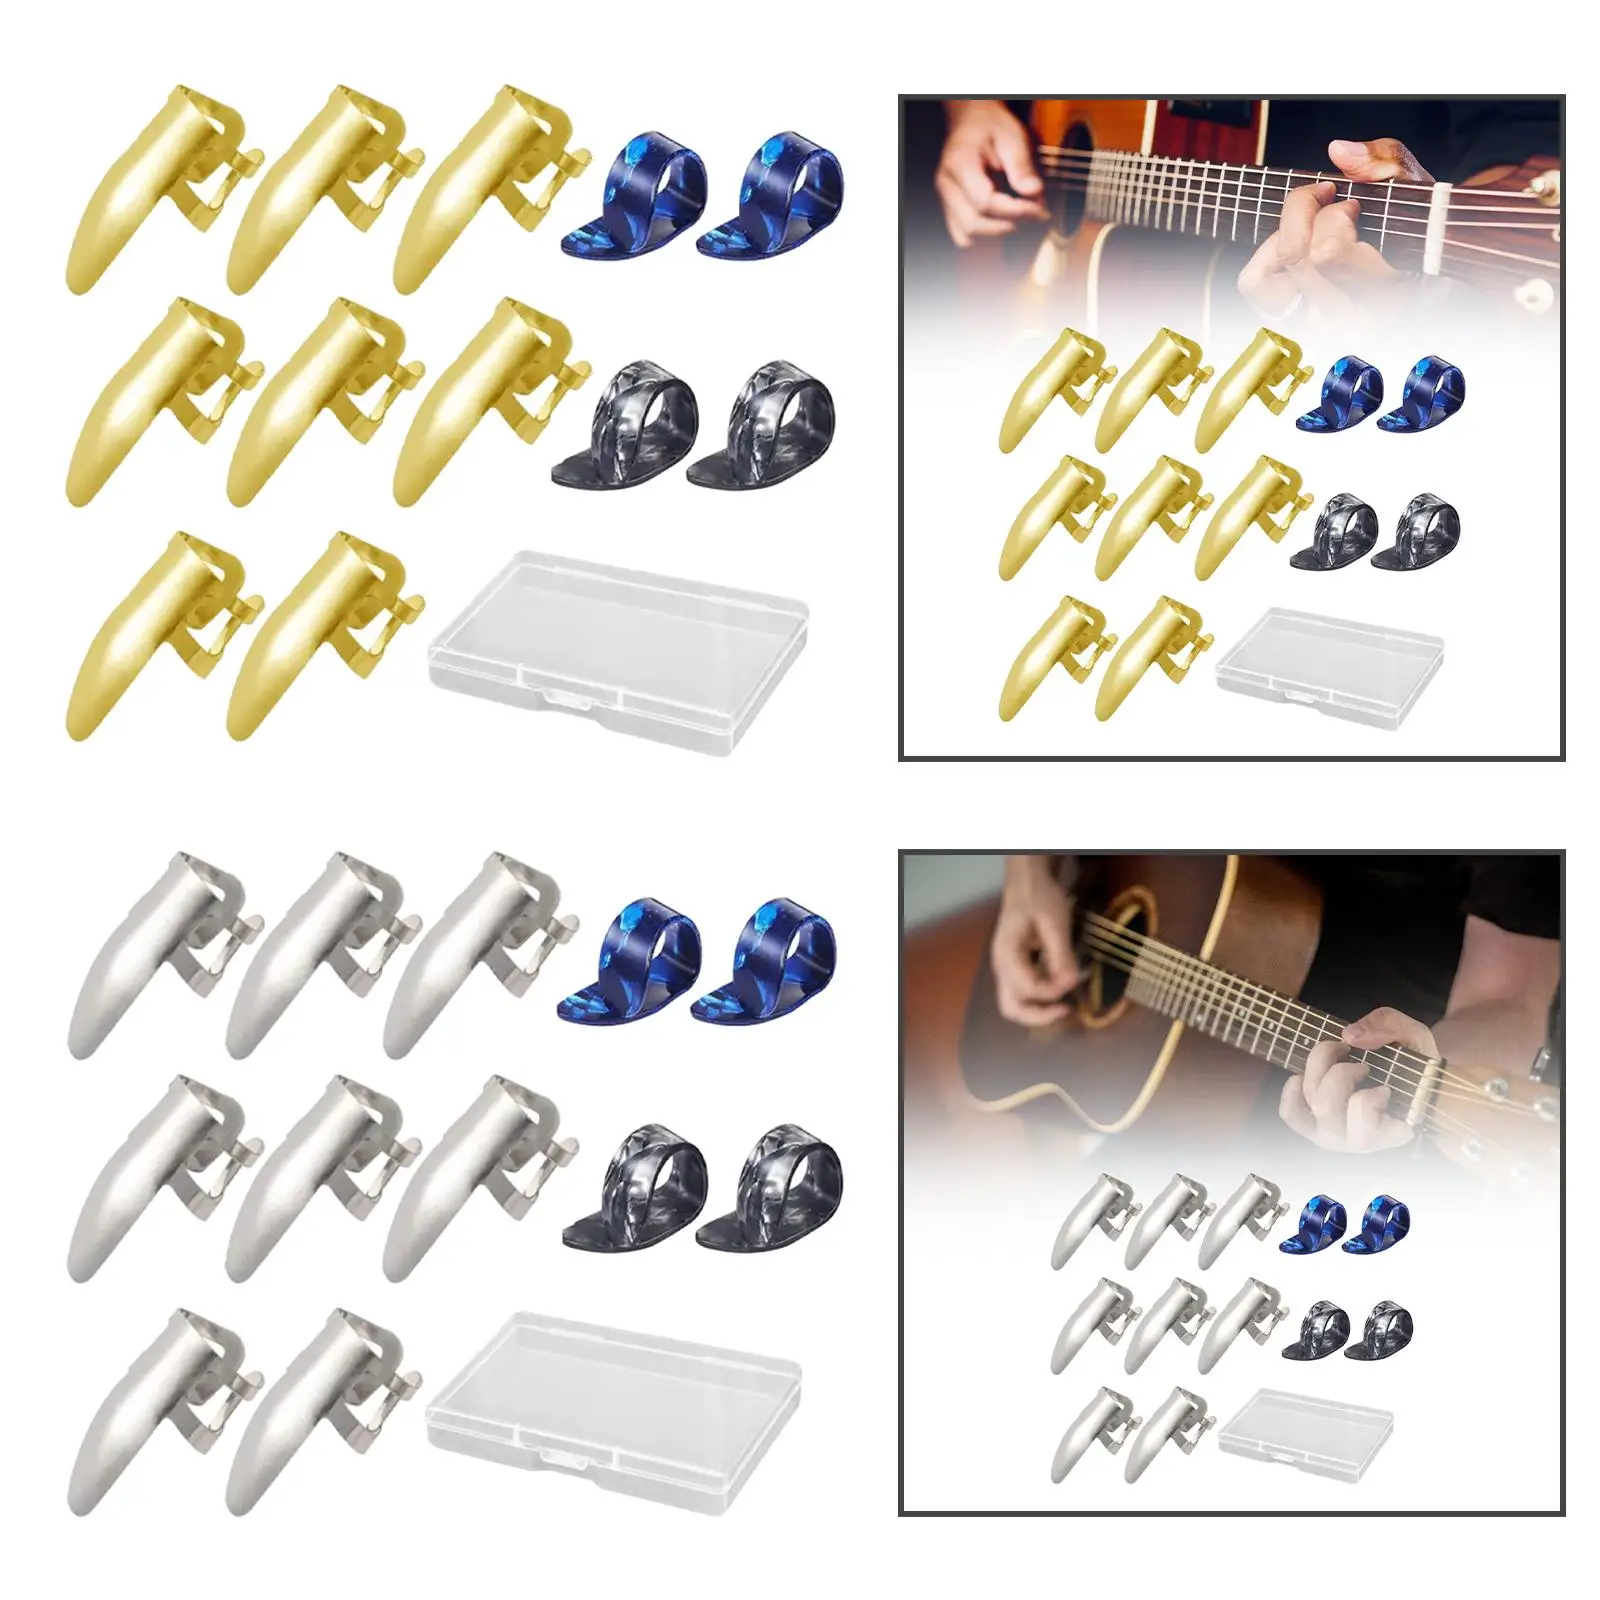 Thumb Pick Instrument Parts Guitar Replacement Parts Steel Finger Picks Set Guitar Finger Pick Plectrums Slide